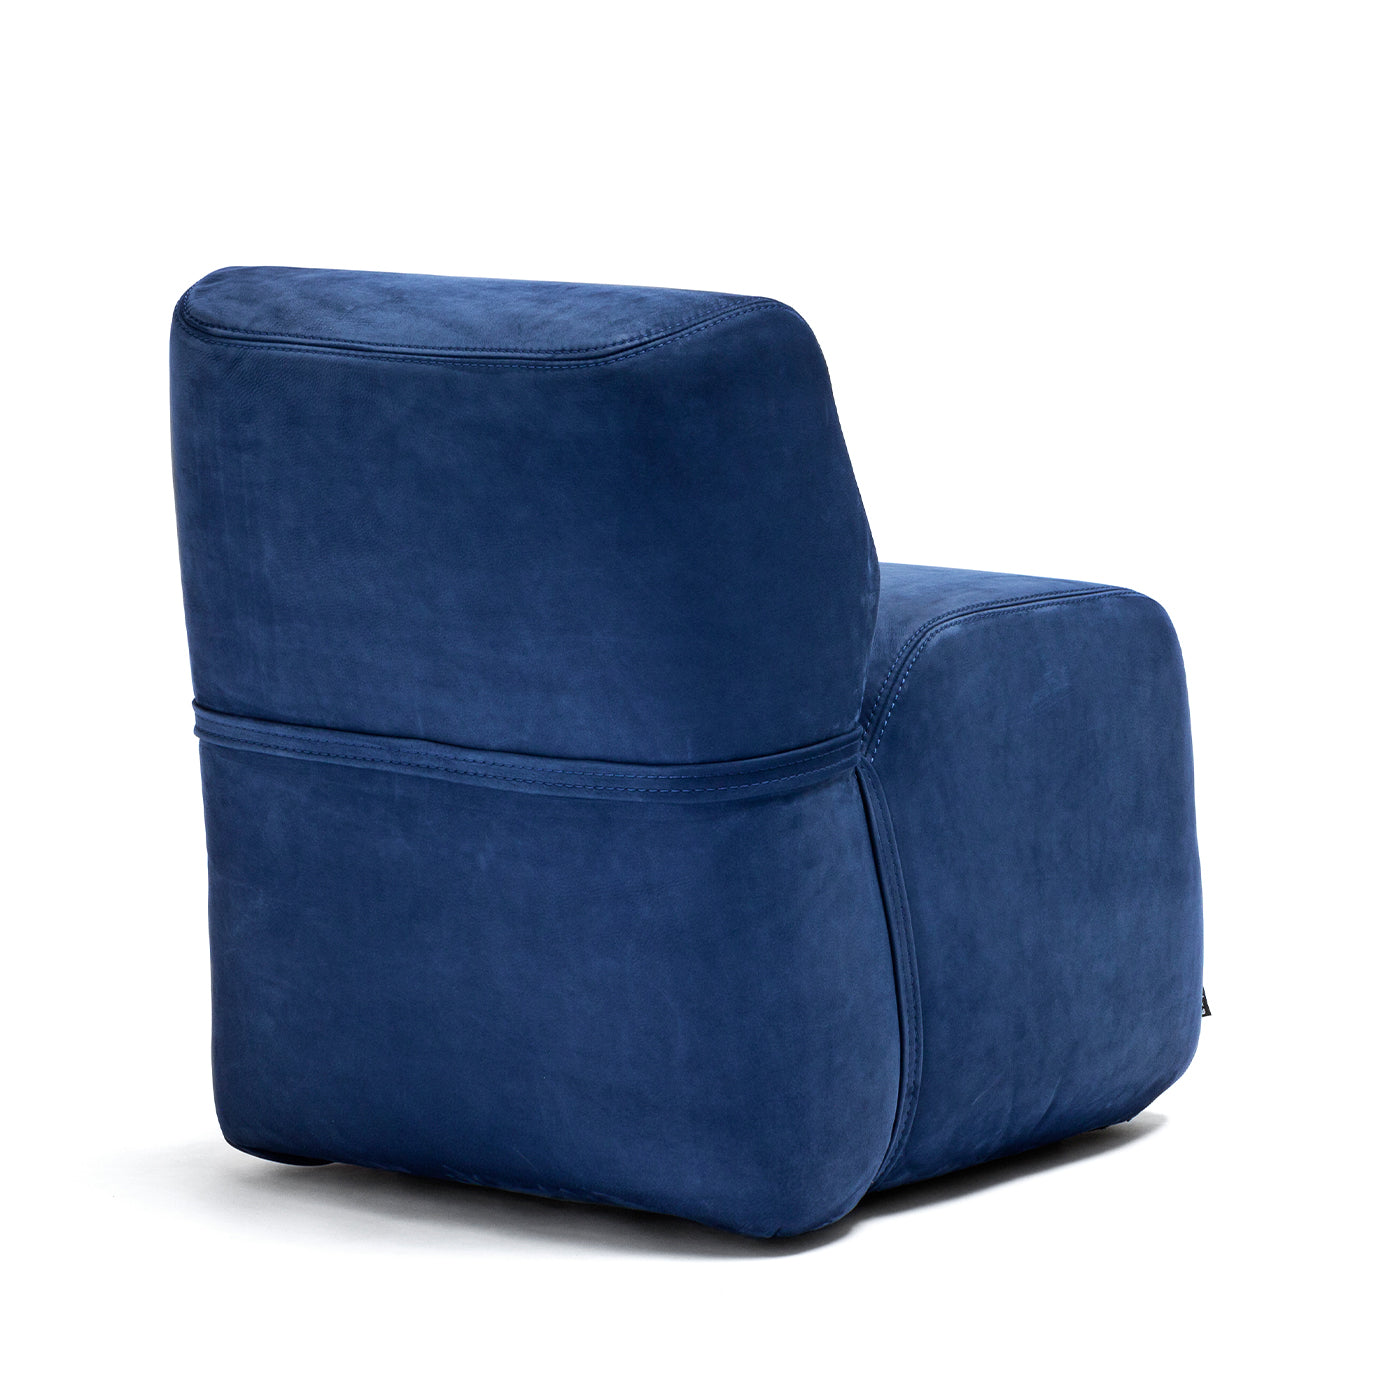 Soft Small Blue Lounge Chair - Alternative view 3